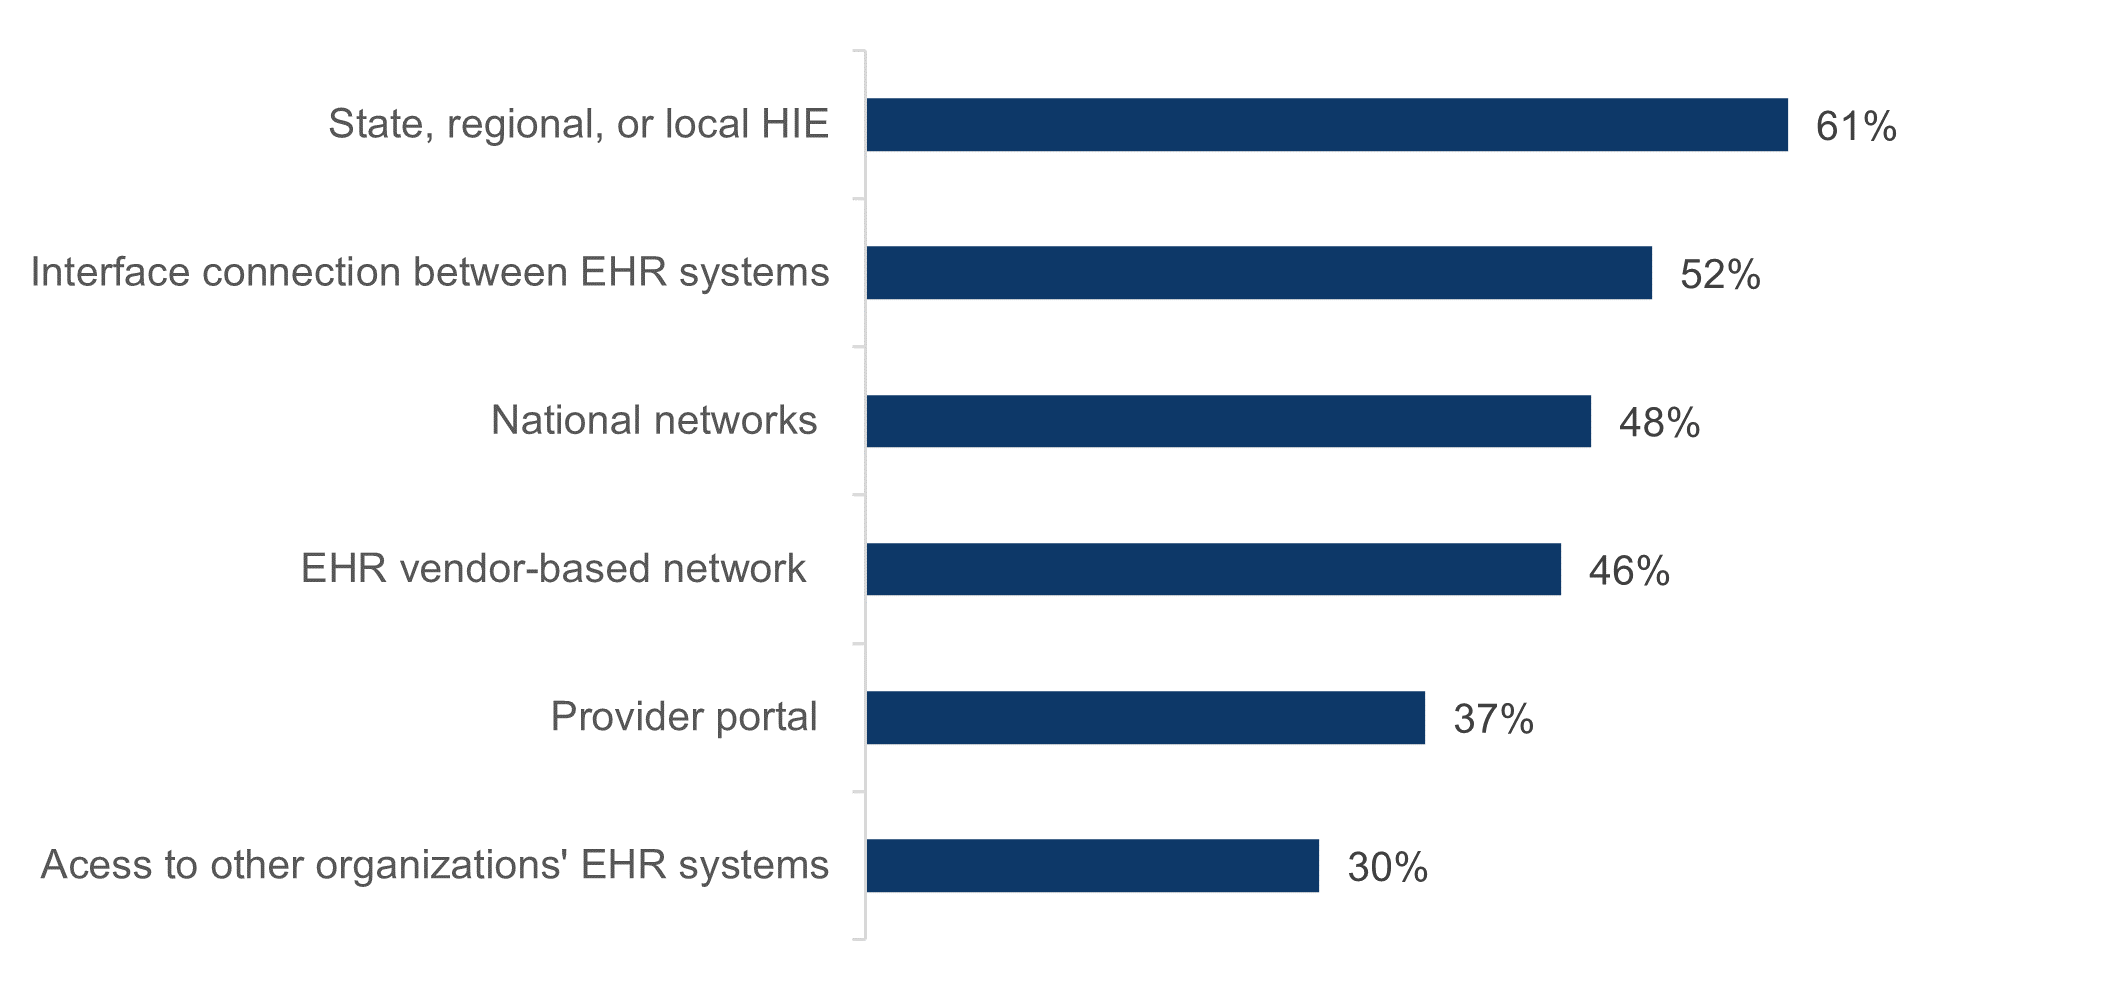 Figure 3 shows methods hospitals use to electronically find (or query) patients’ health information. In 2021, 61%, 52%, 48%, 46%, 37%, 30% of hospitals used HIE, interface connection between EHRs, national networks, EHR vendor-based network, provider portal, and access to other organizations’ EHR systems, respectively, to find patient information. 